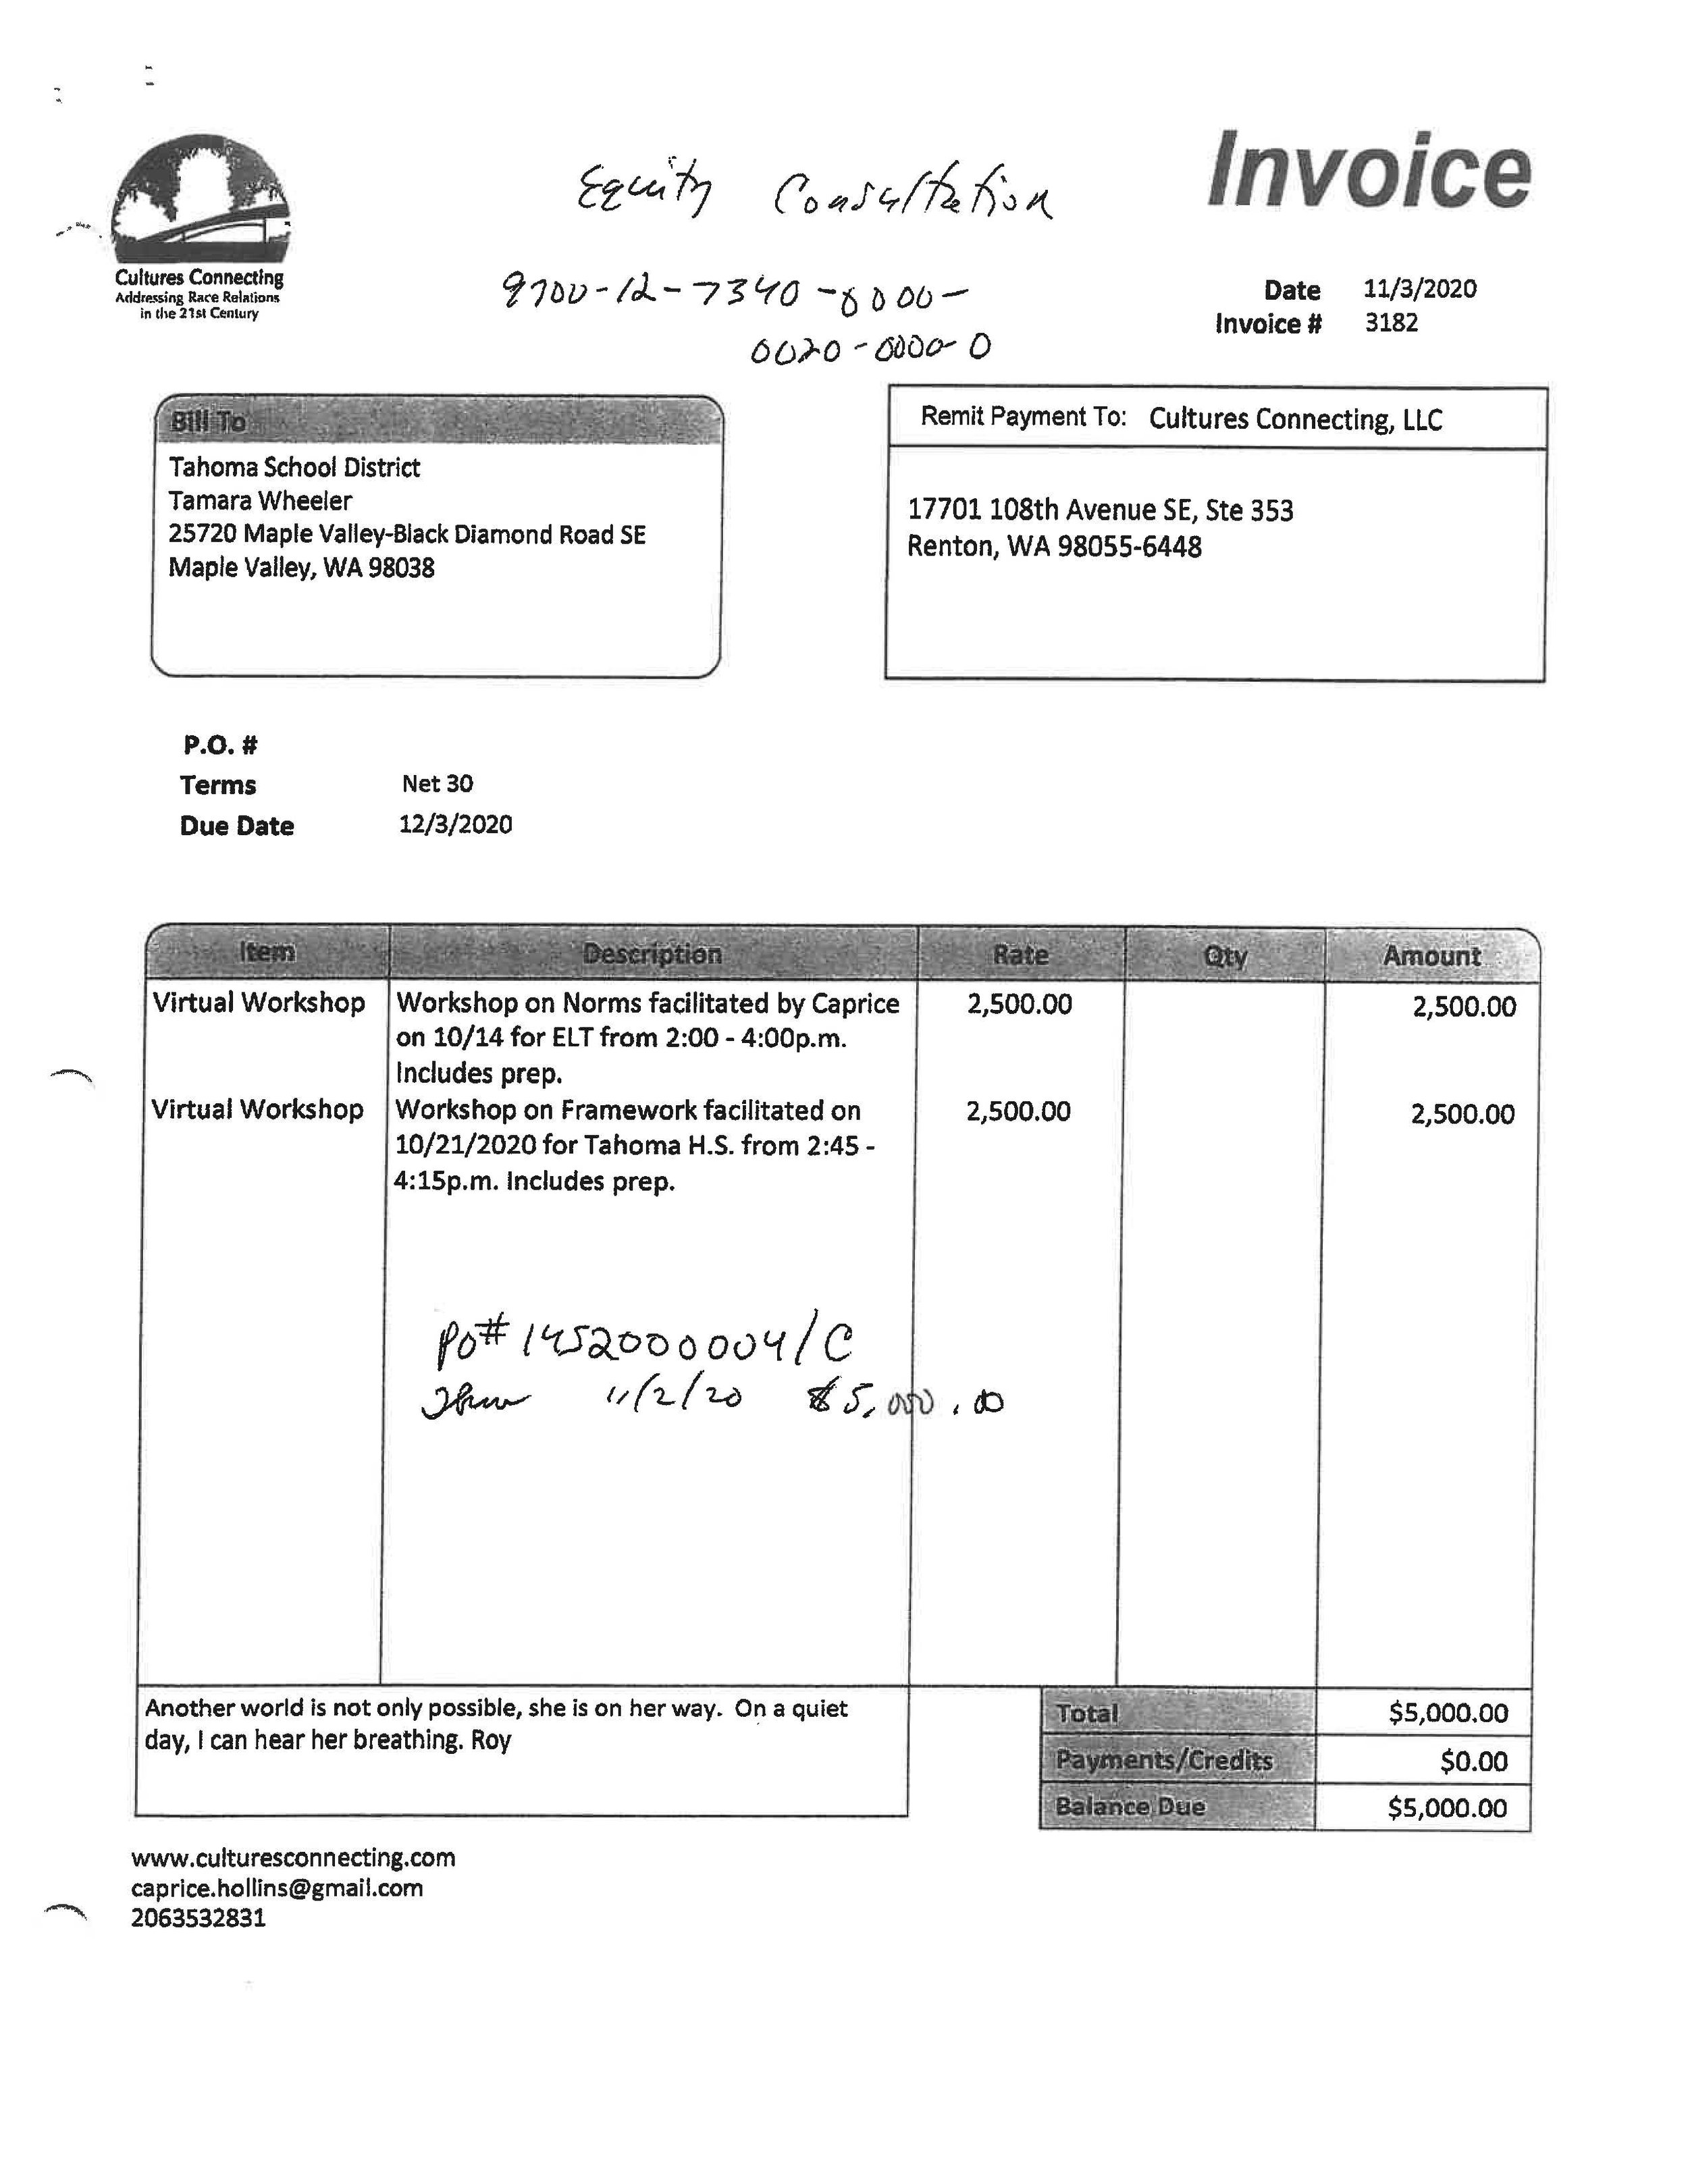 CH invoices_Page_03.jpg